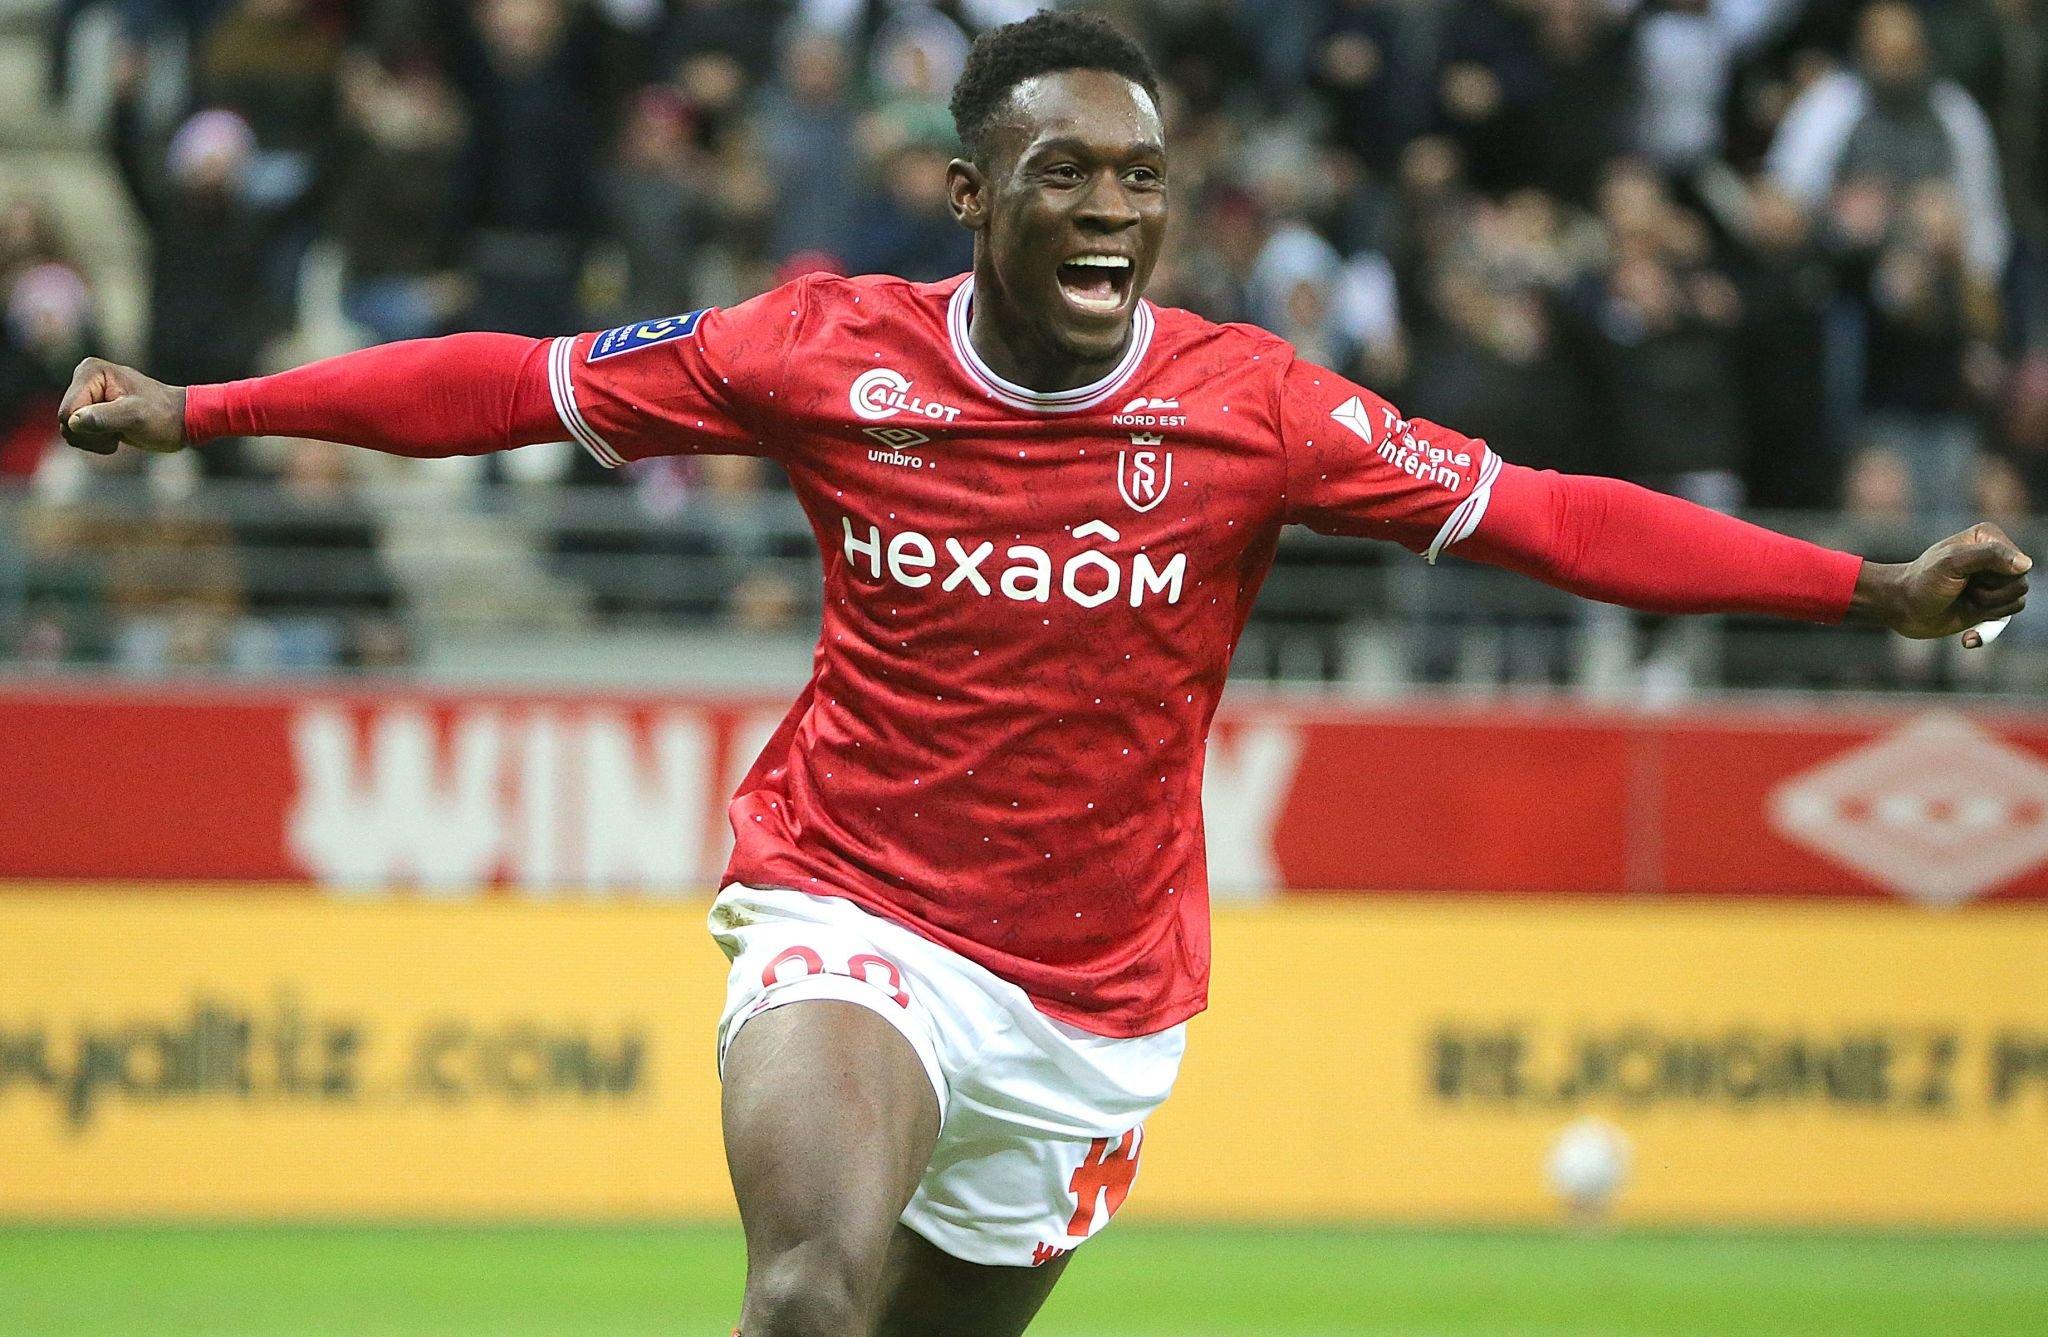 Reims' English forward Folarin Balogun celebrates scoring a goal during the French L1 football match between Stade de Reims and Stade Rennais FC at the Auguste-Delaune II stadium in Reims on December 29, 2022. (Photo by FRANCOIS NASCIMBENI / AFP) (Photo by FRANCOIS NASCIMBENI/AFP via Getty Images)